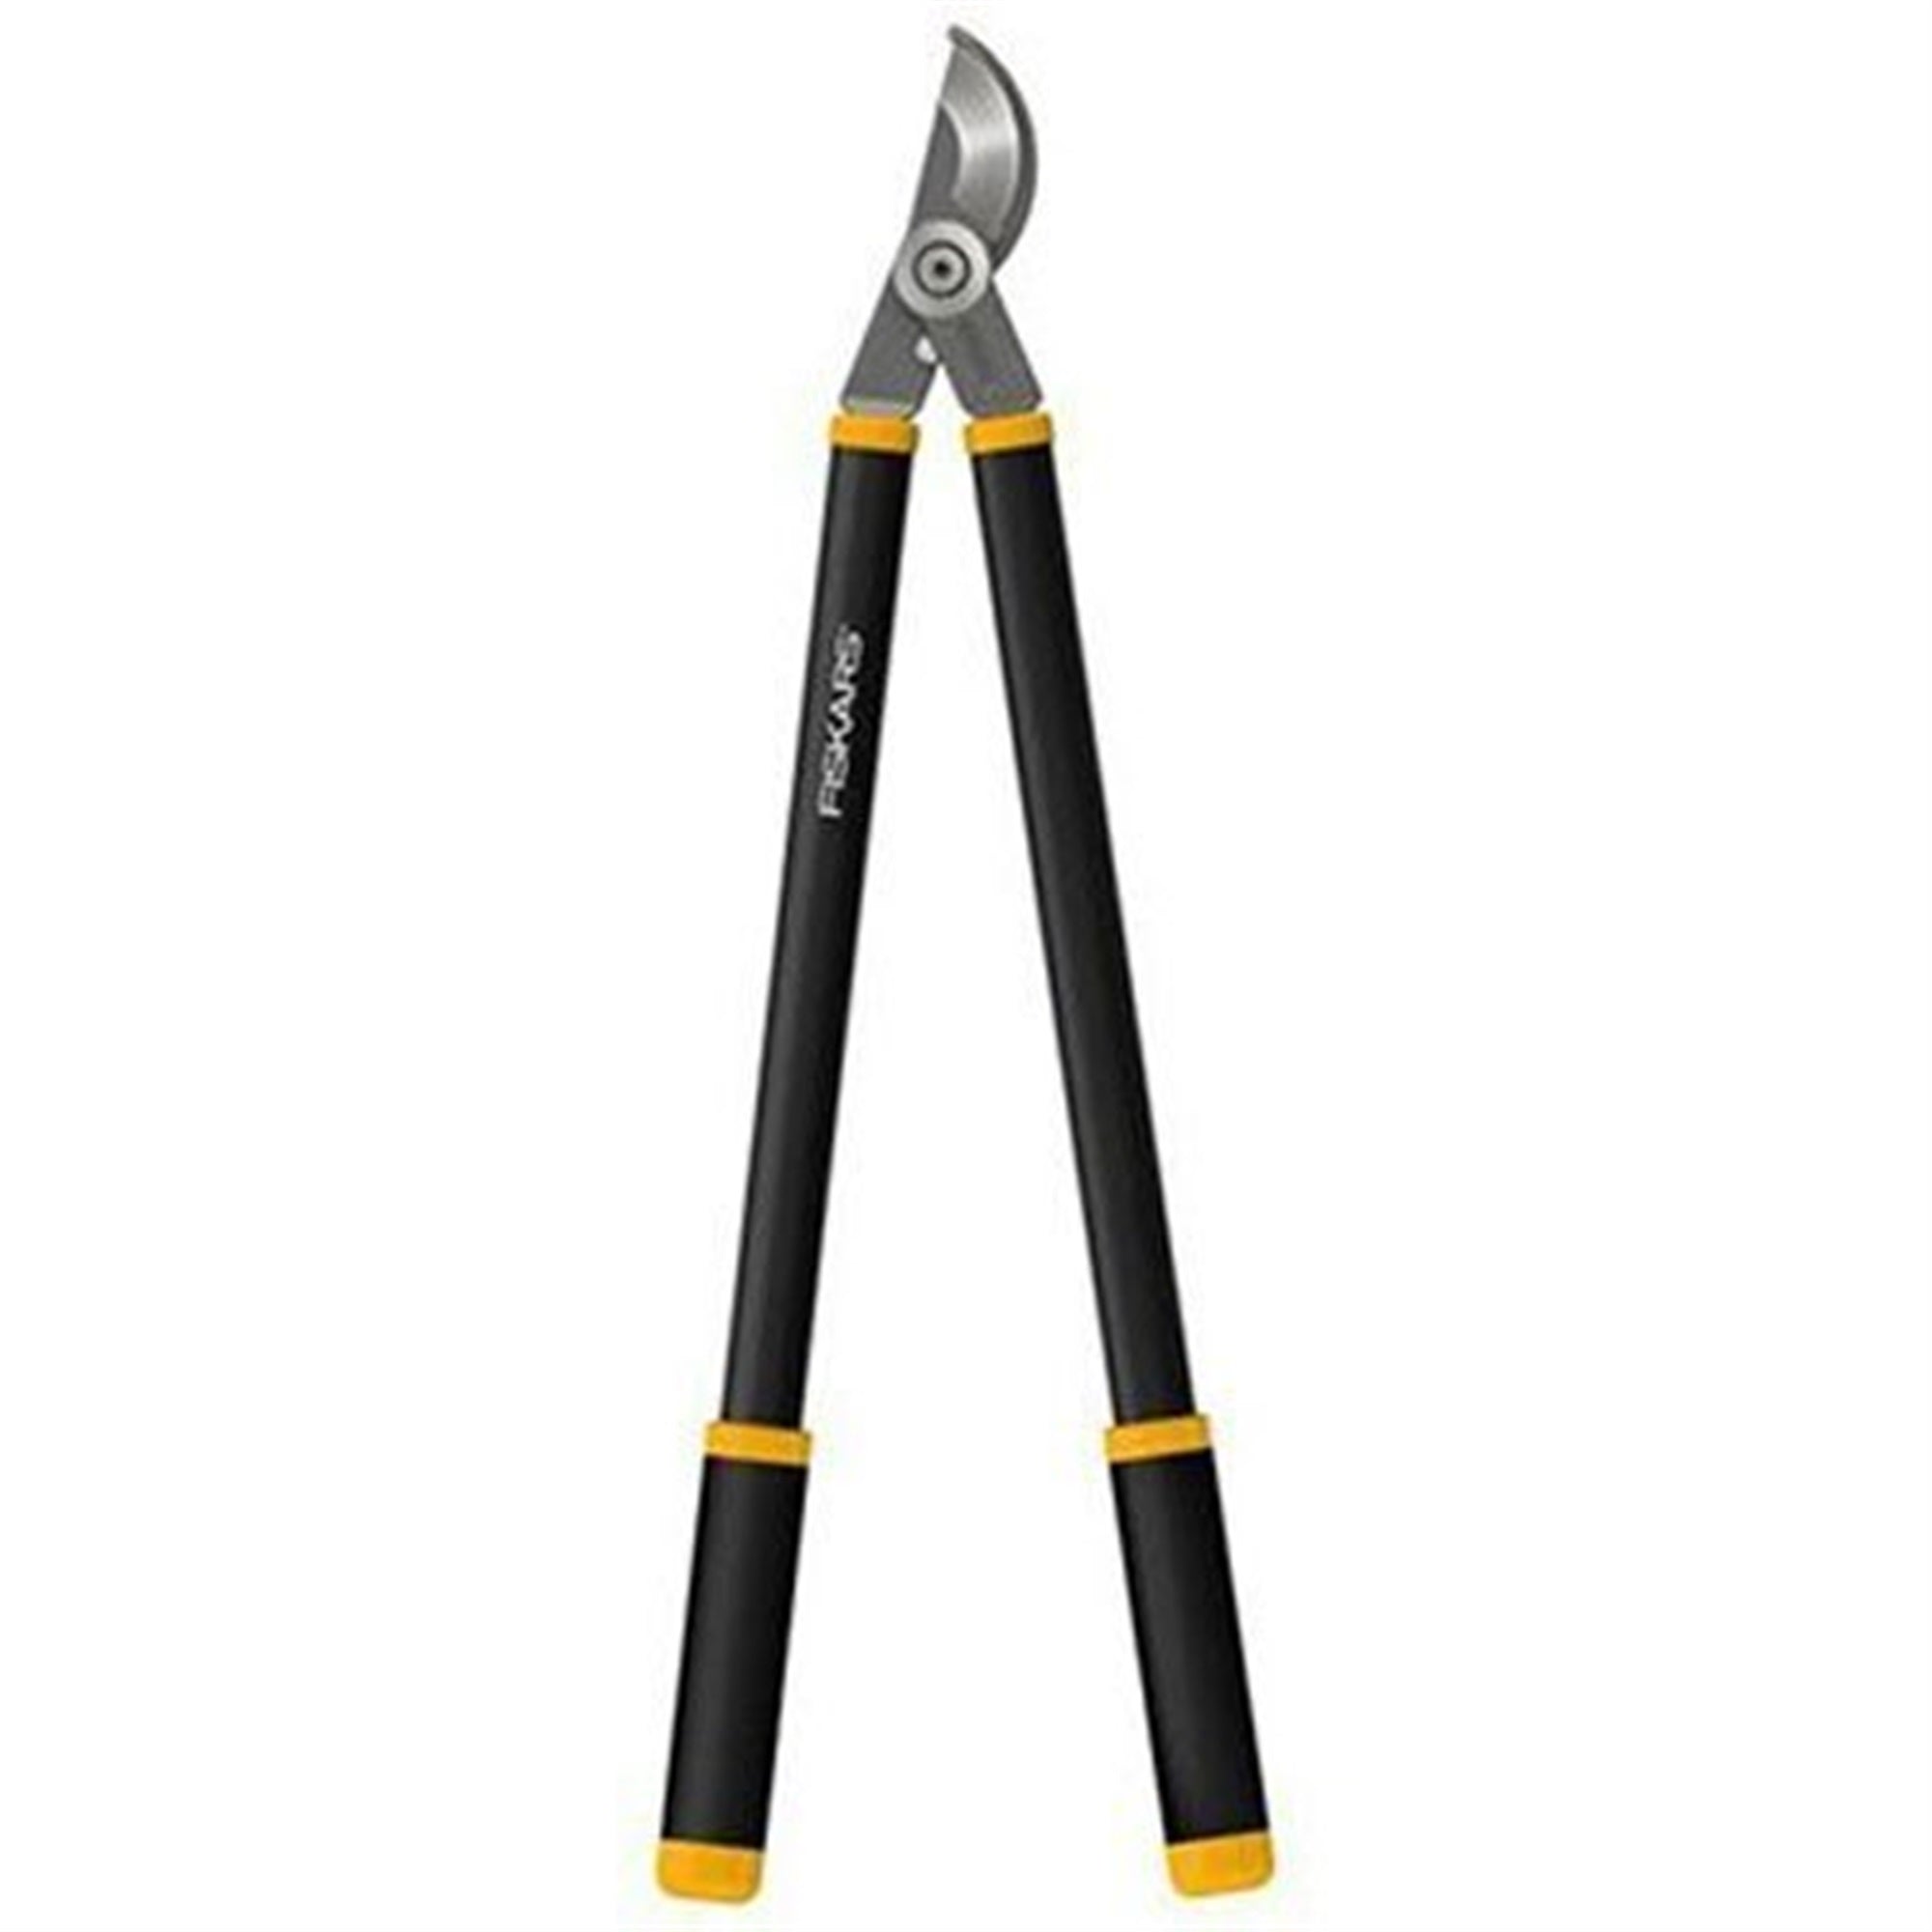 Fiskars Forged Bypass Lopper, 28" with 1.75" Diameter Cutting Capacity